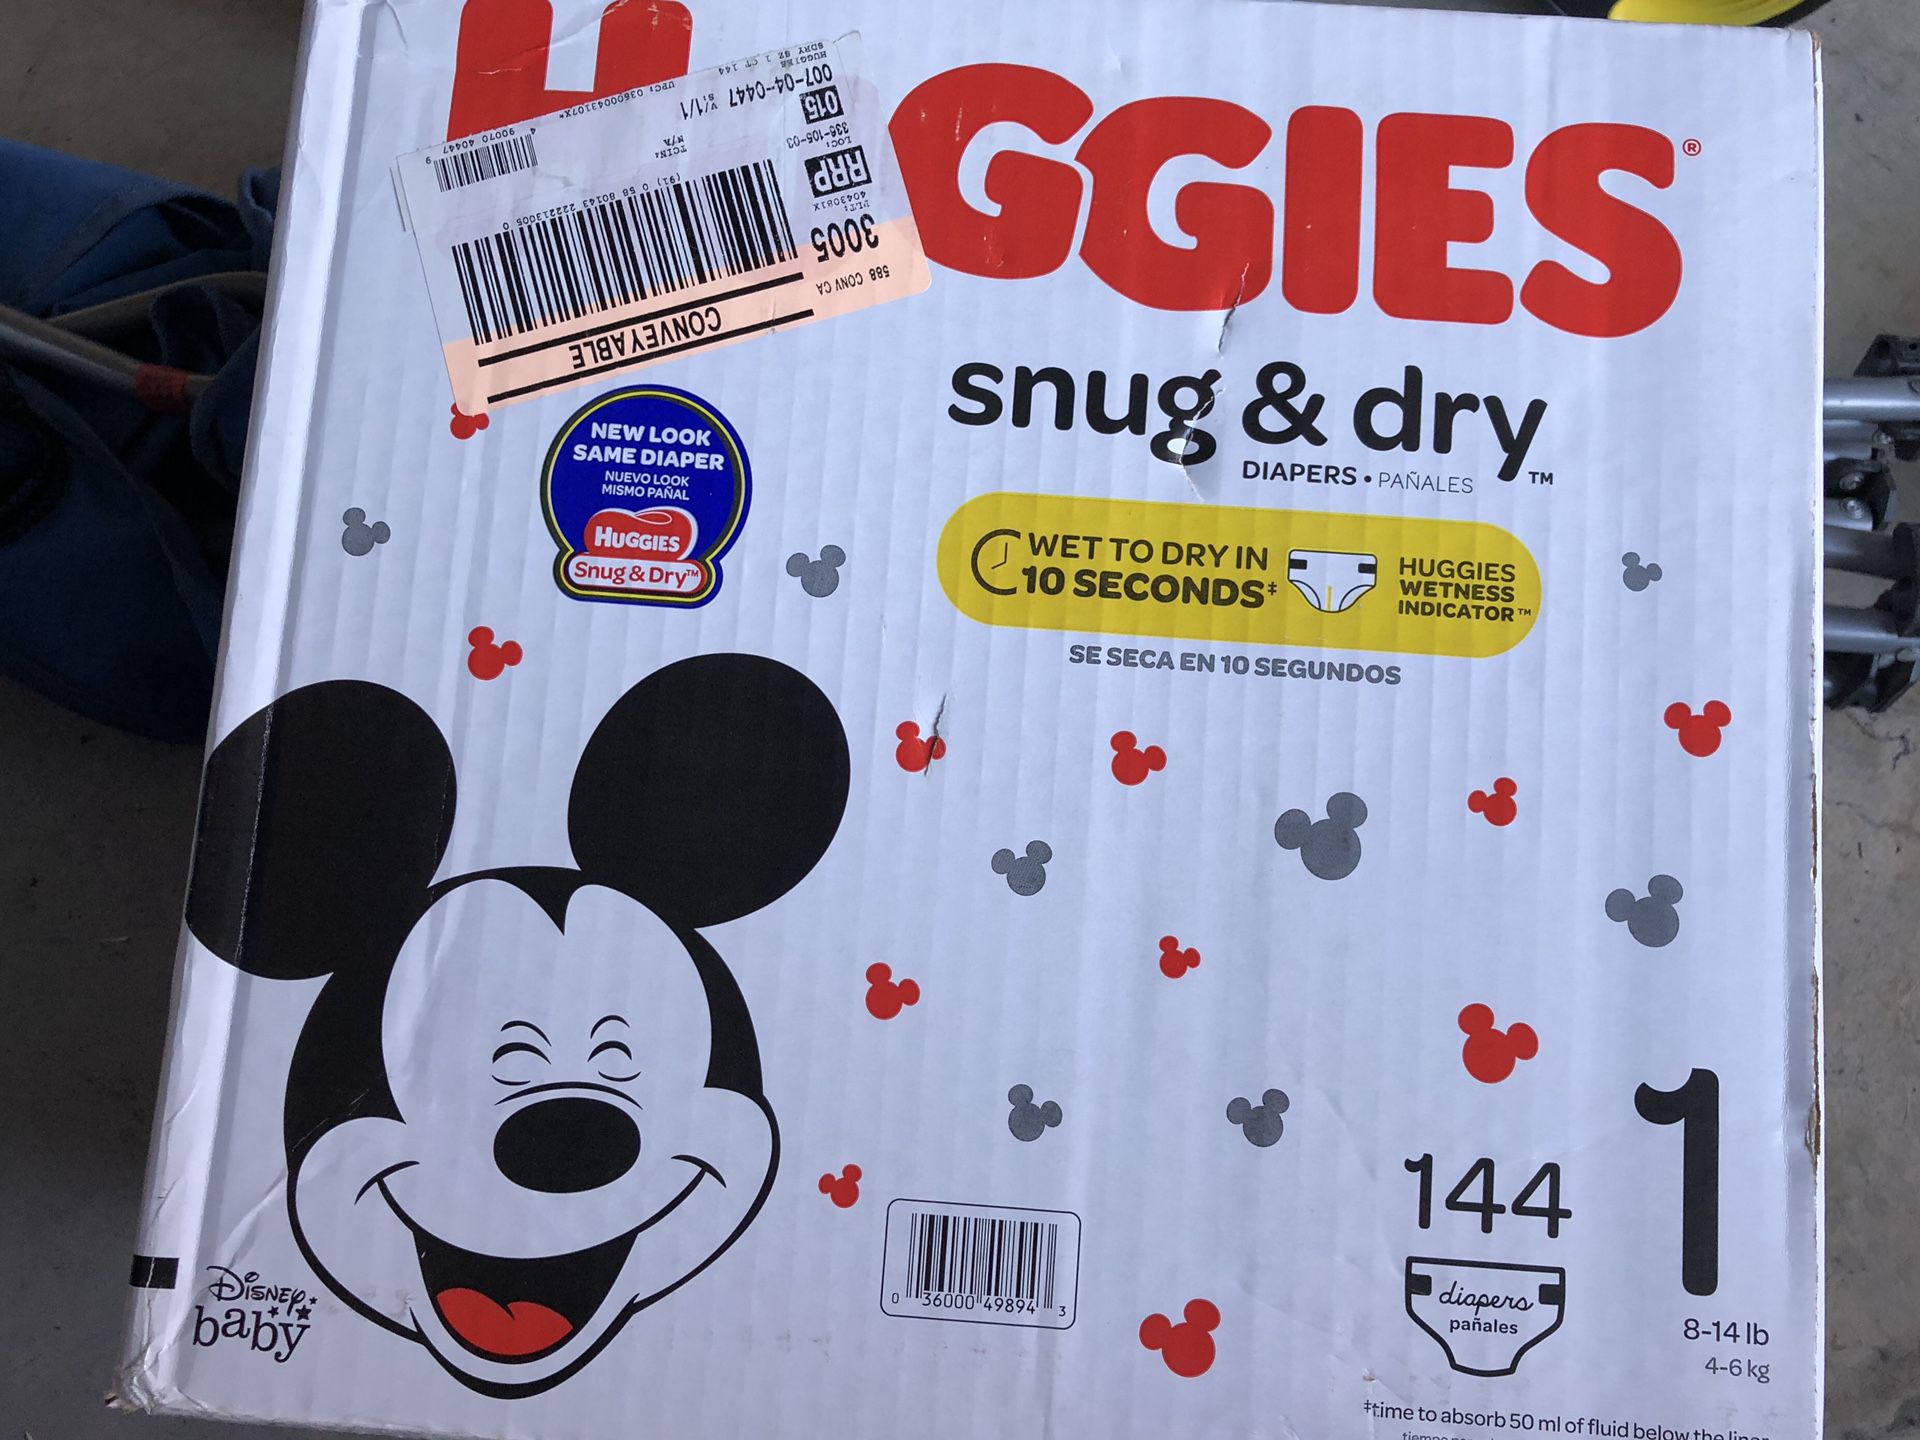 Huggies Diaper size 1 , ct 144 “NEVER USED”